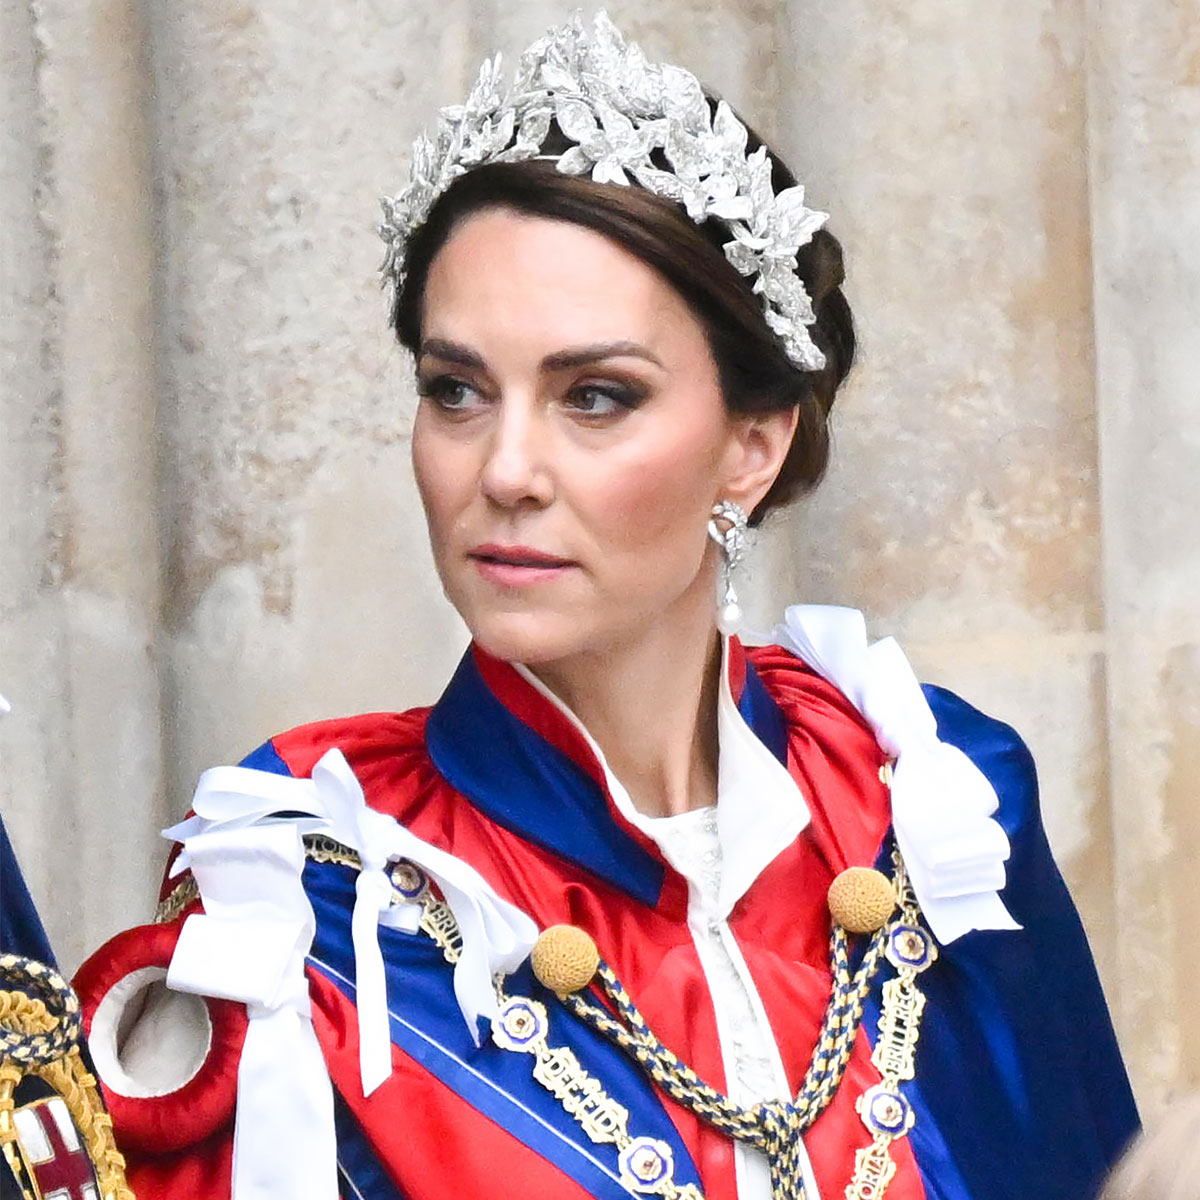 Kate Middleton Skips The Tiara And Wears A Flower Headpiece For King ...